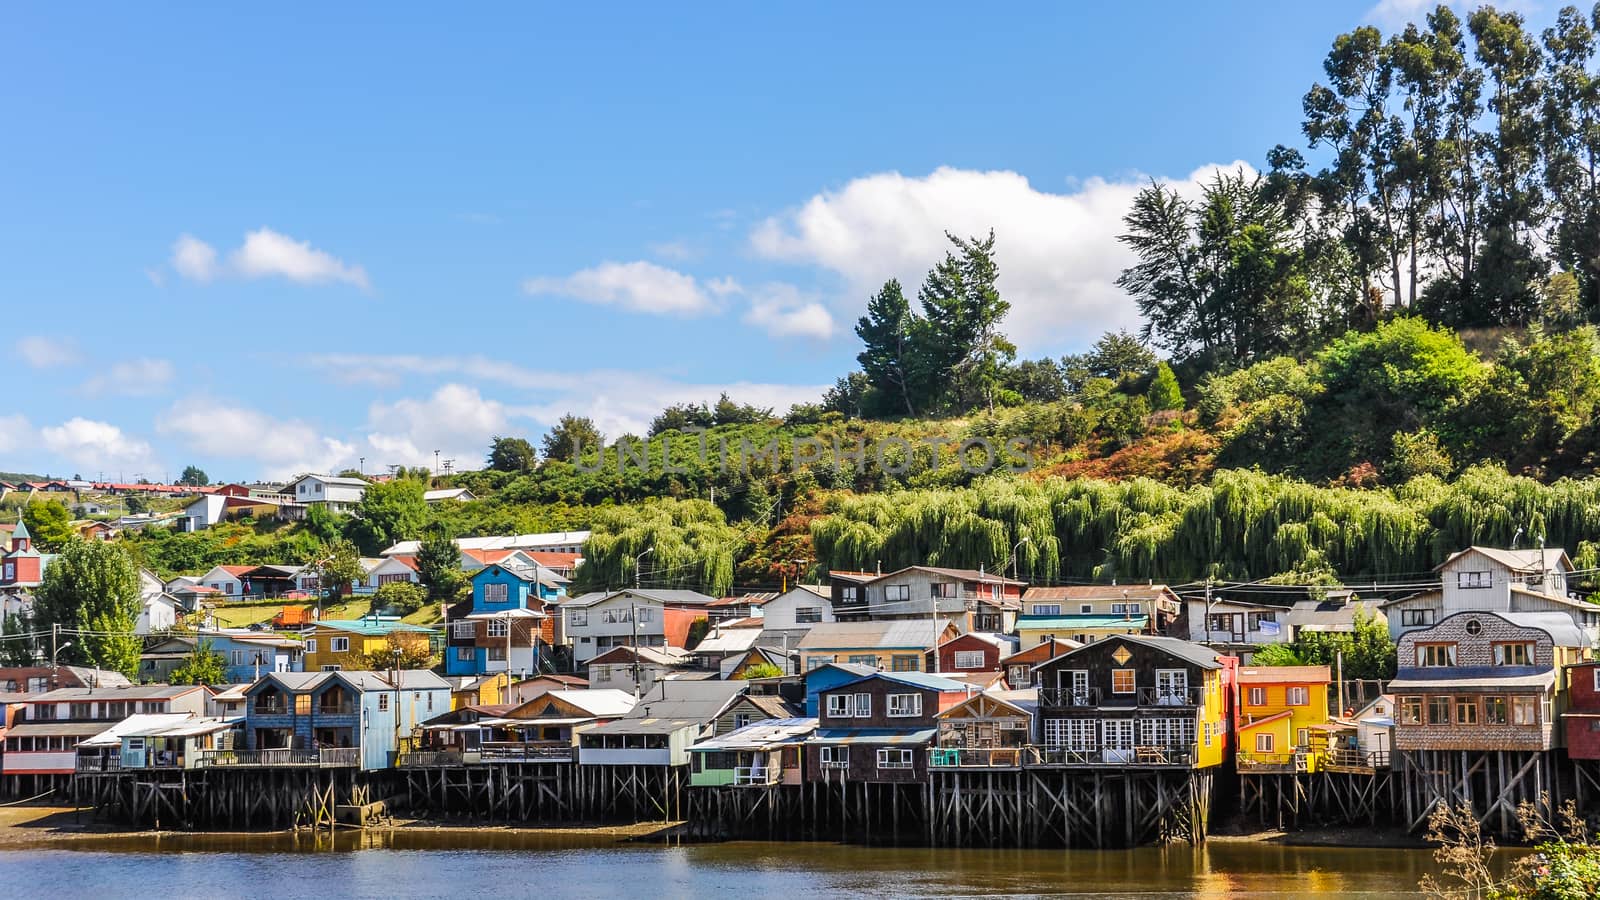 Houses standing on small columns, Chiloe Island, Patagonia, Chile